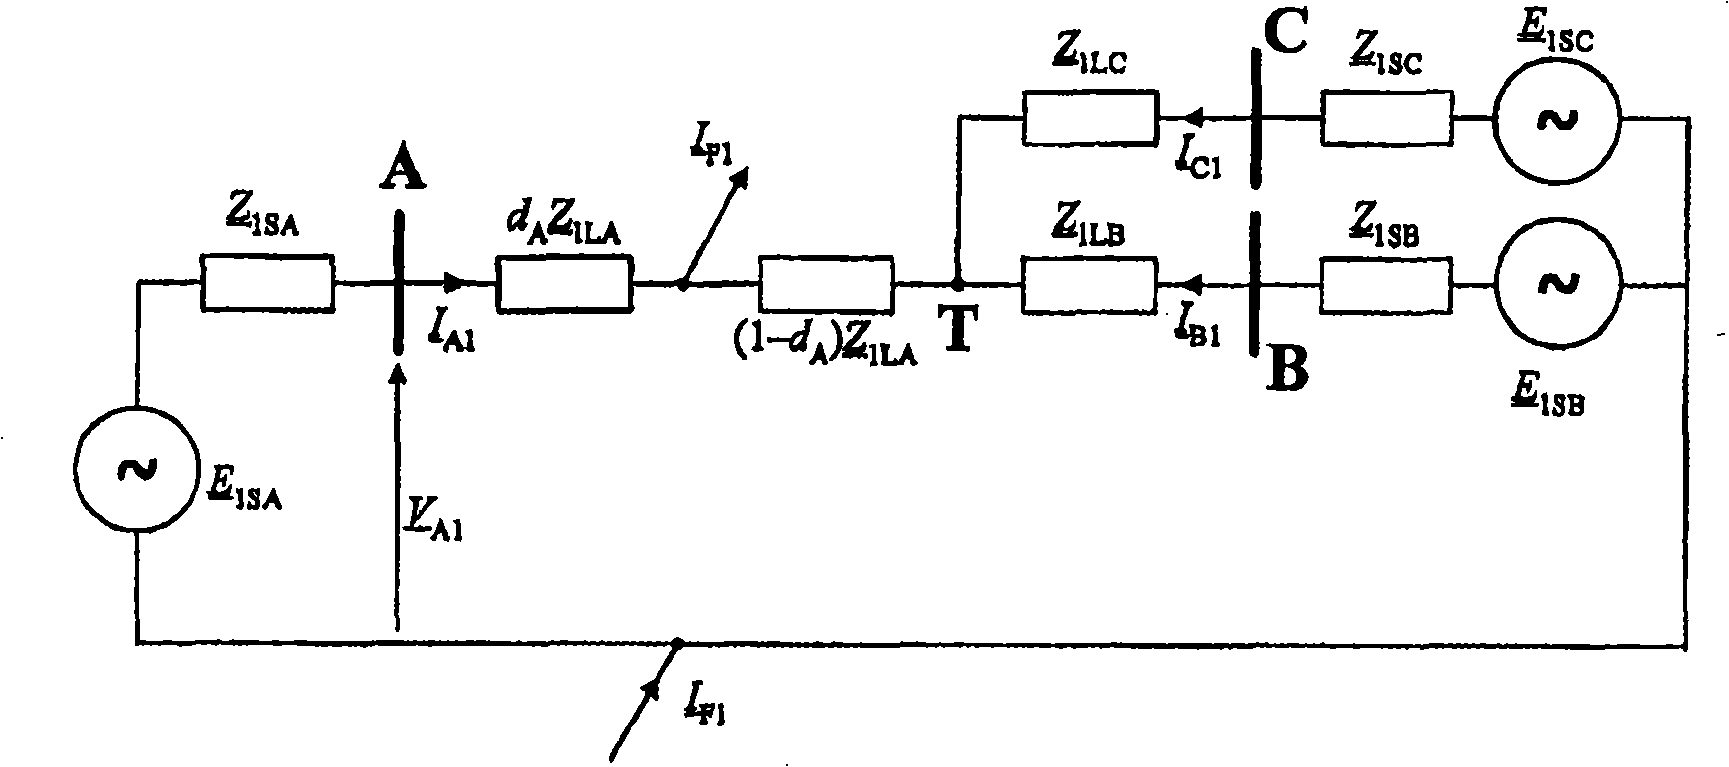 A method for fault location in electric power lines